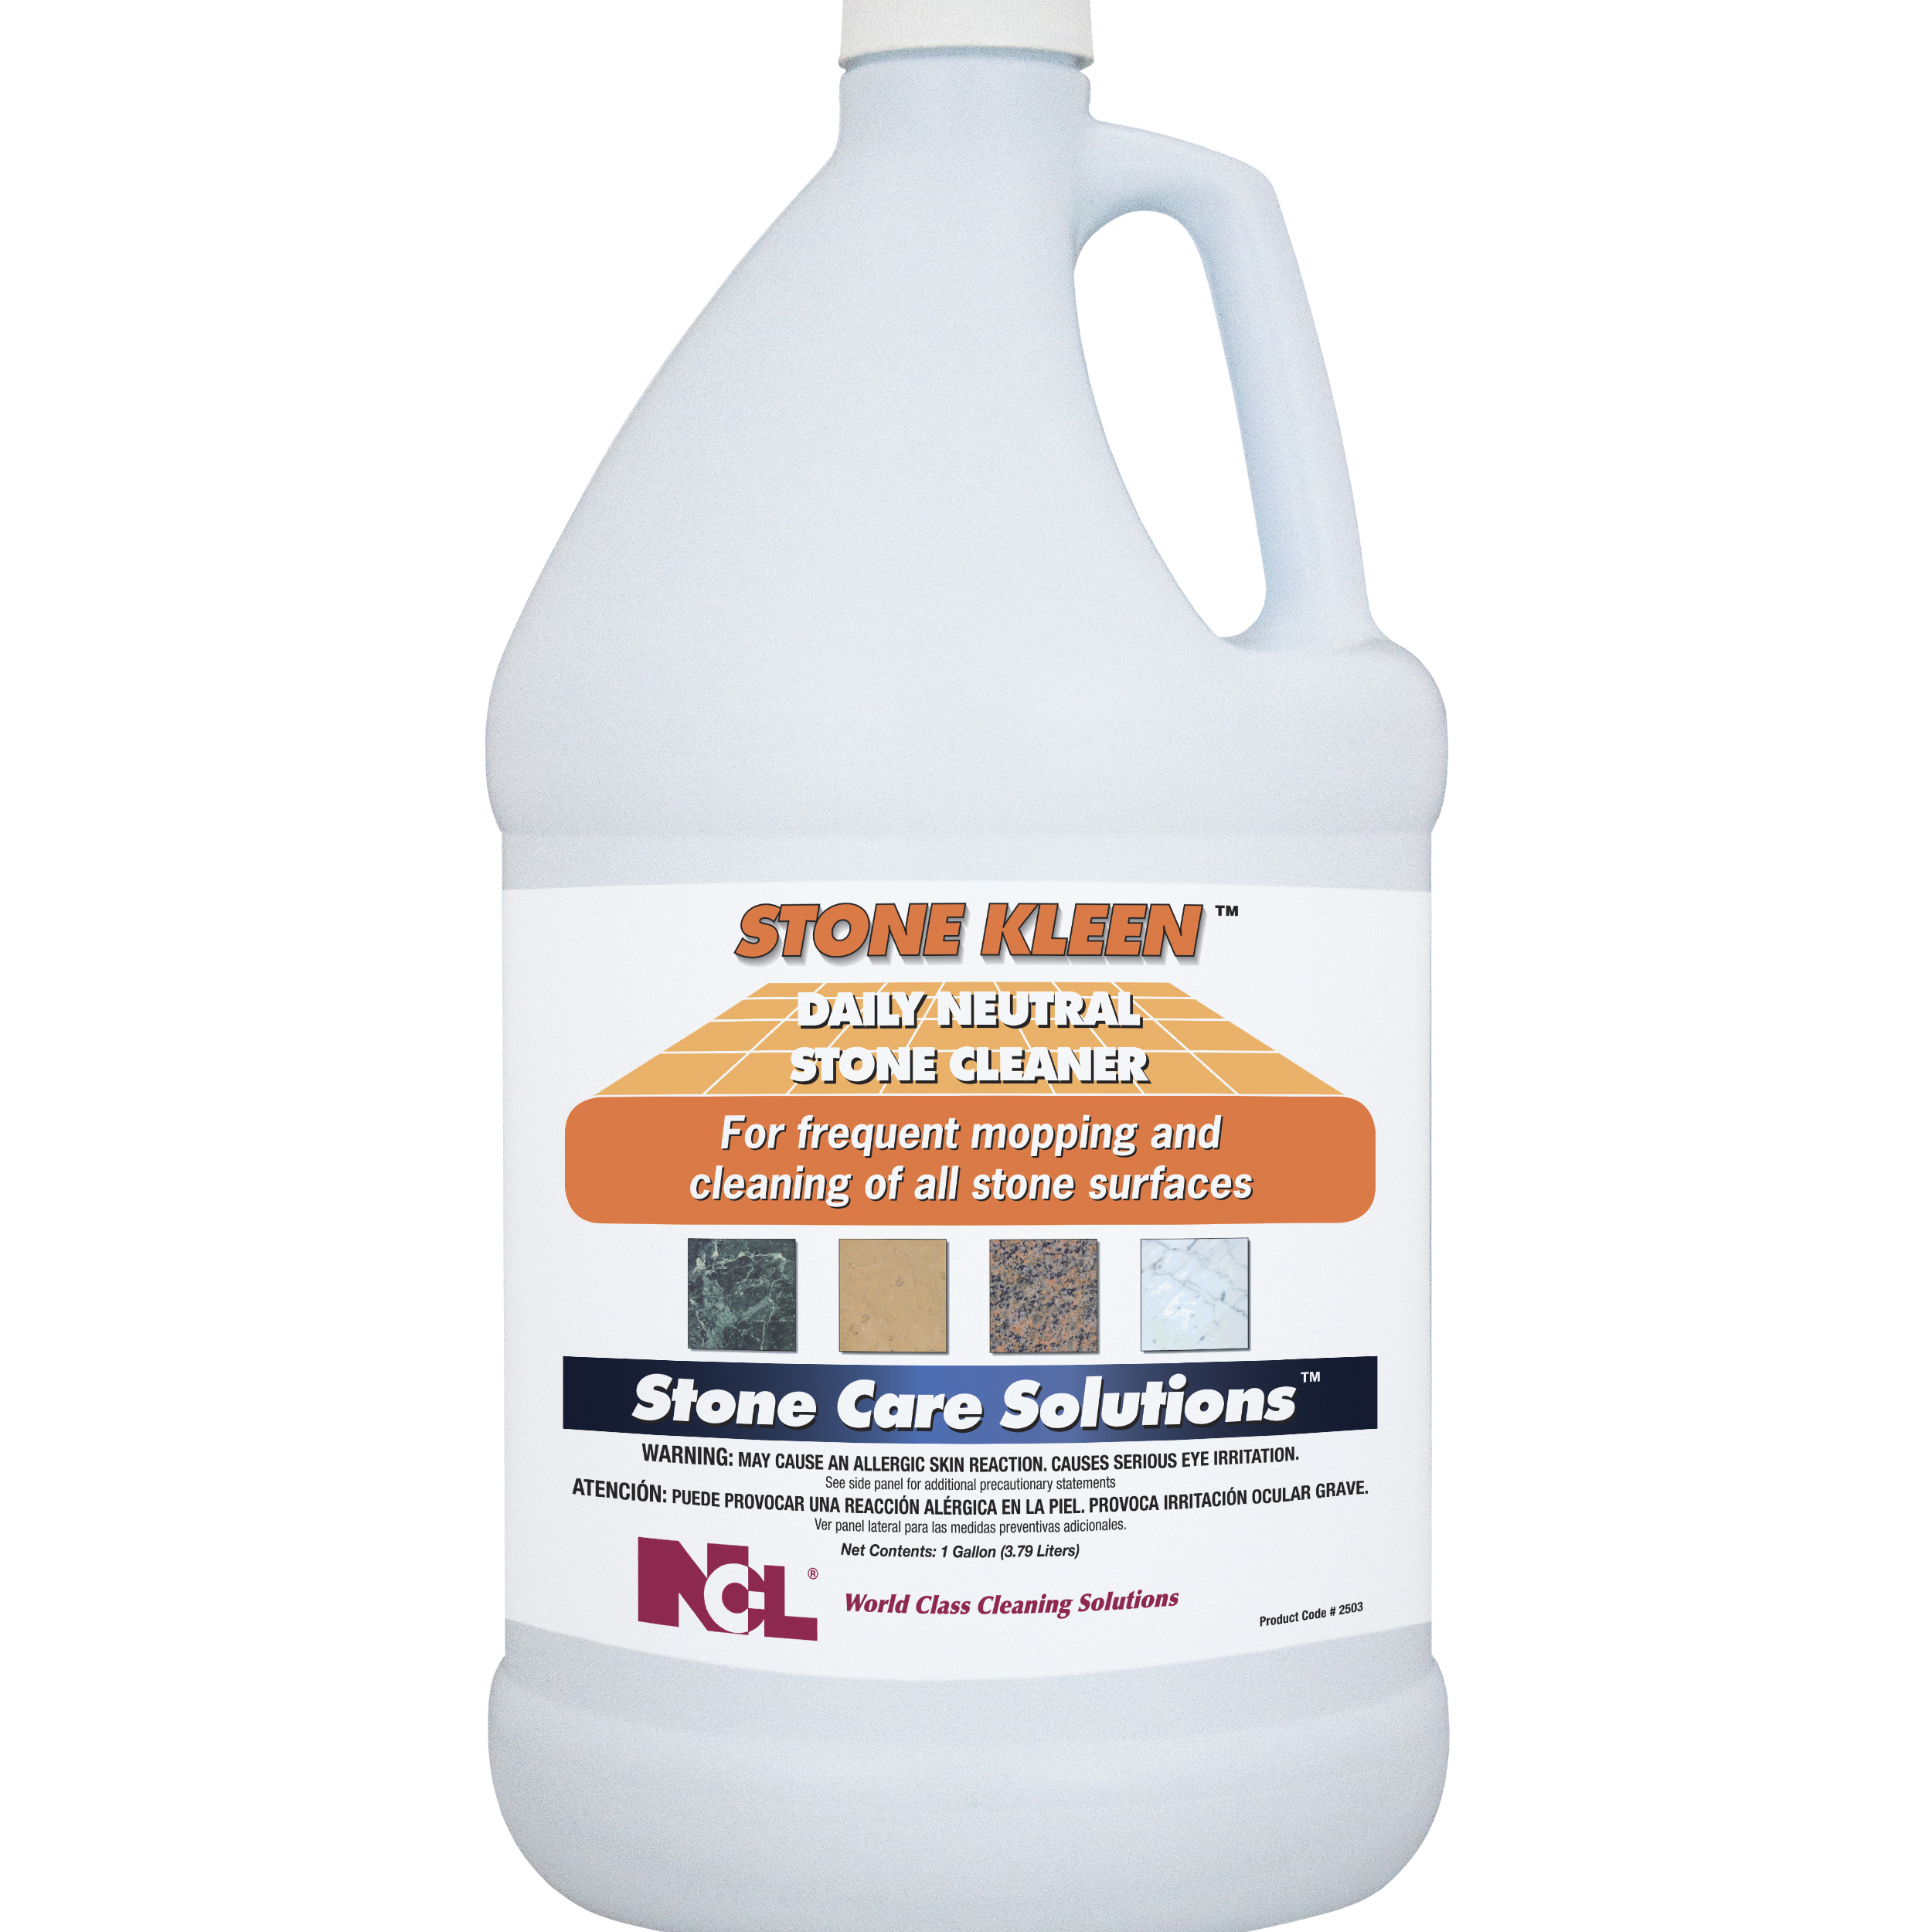  STONE KLEEN Daily Neutral Stone Cleaner 4/1 Gal. Case (NCL2503-29) 